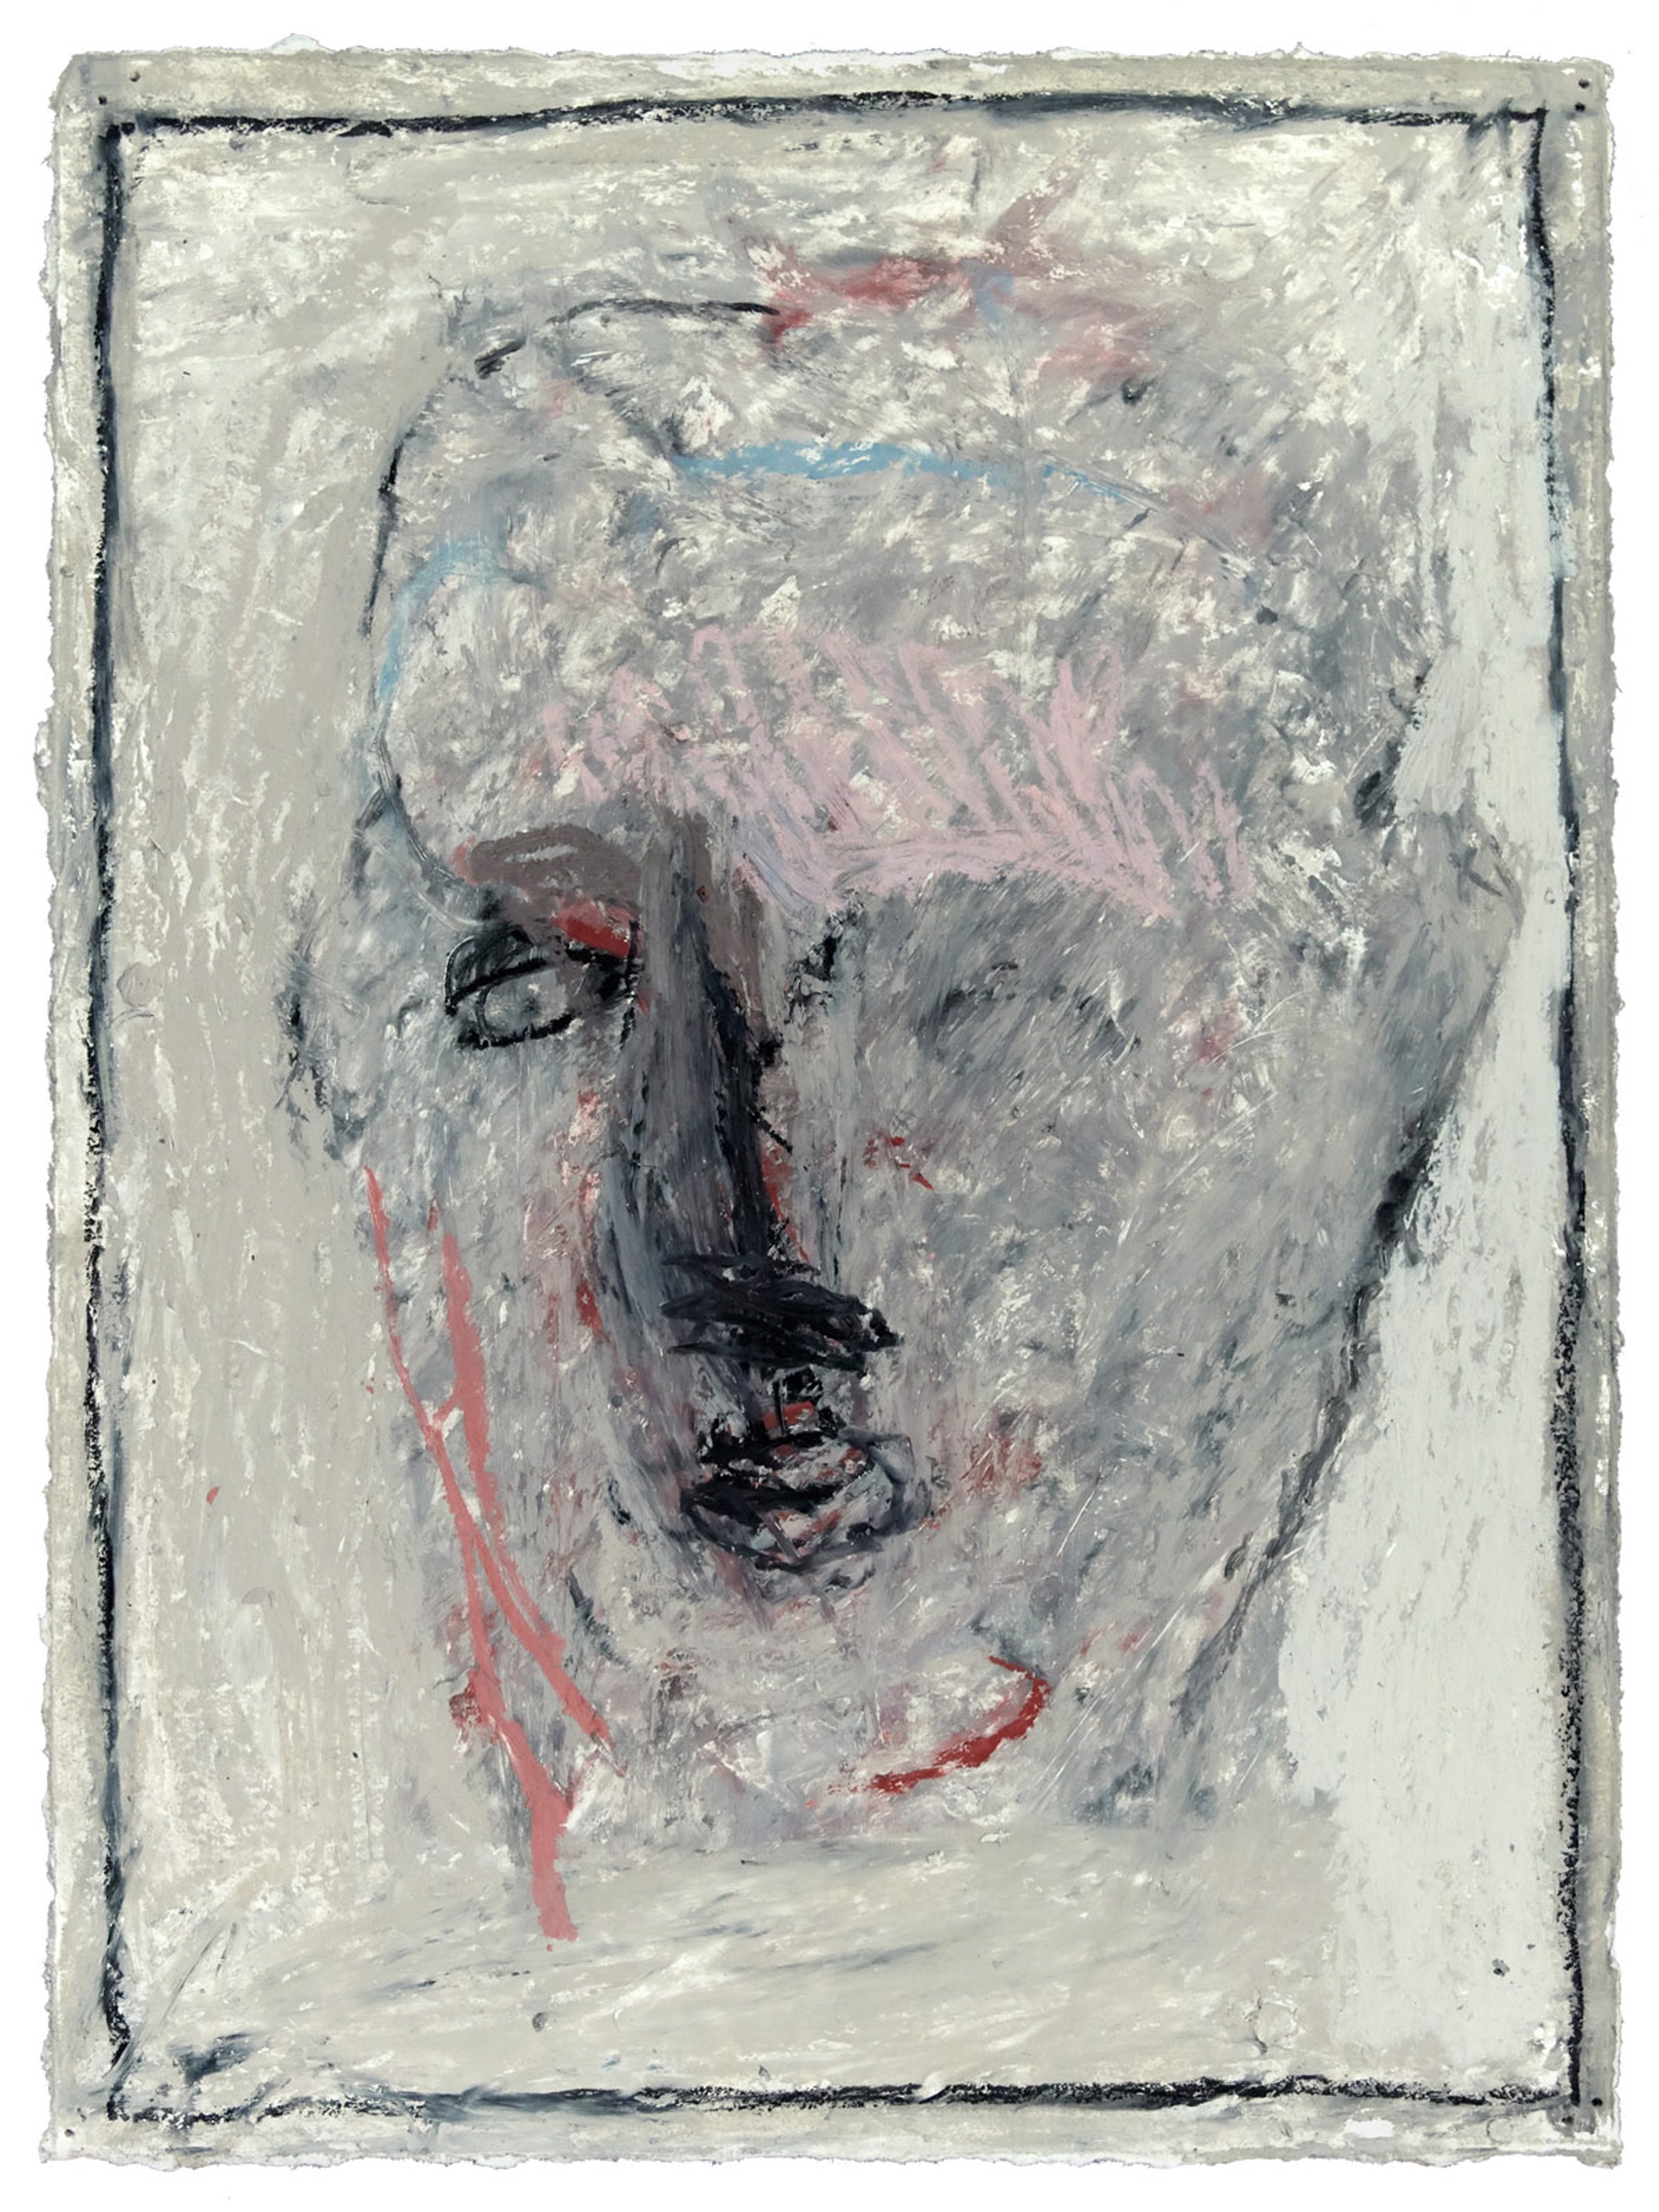 Drawings from Mt Gretna: Head #1 by Thaddeus Radell